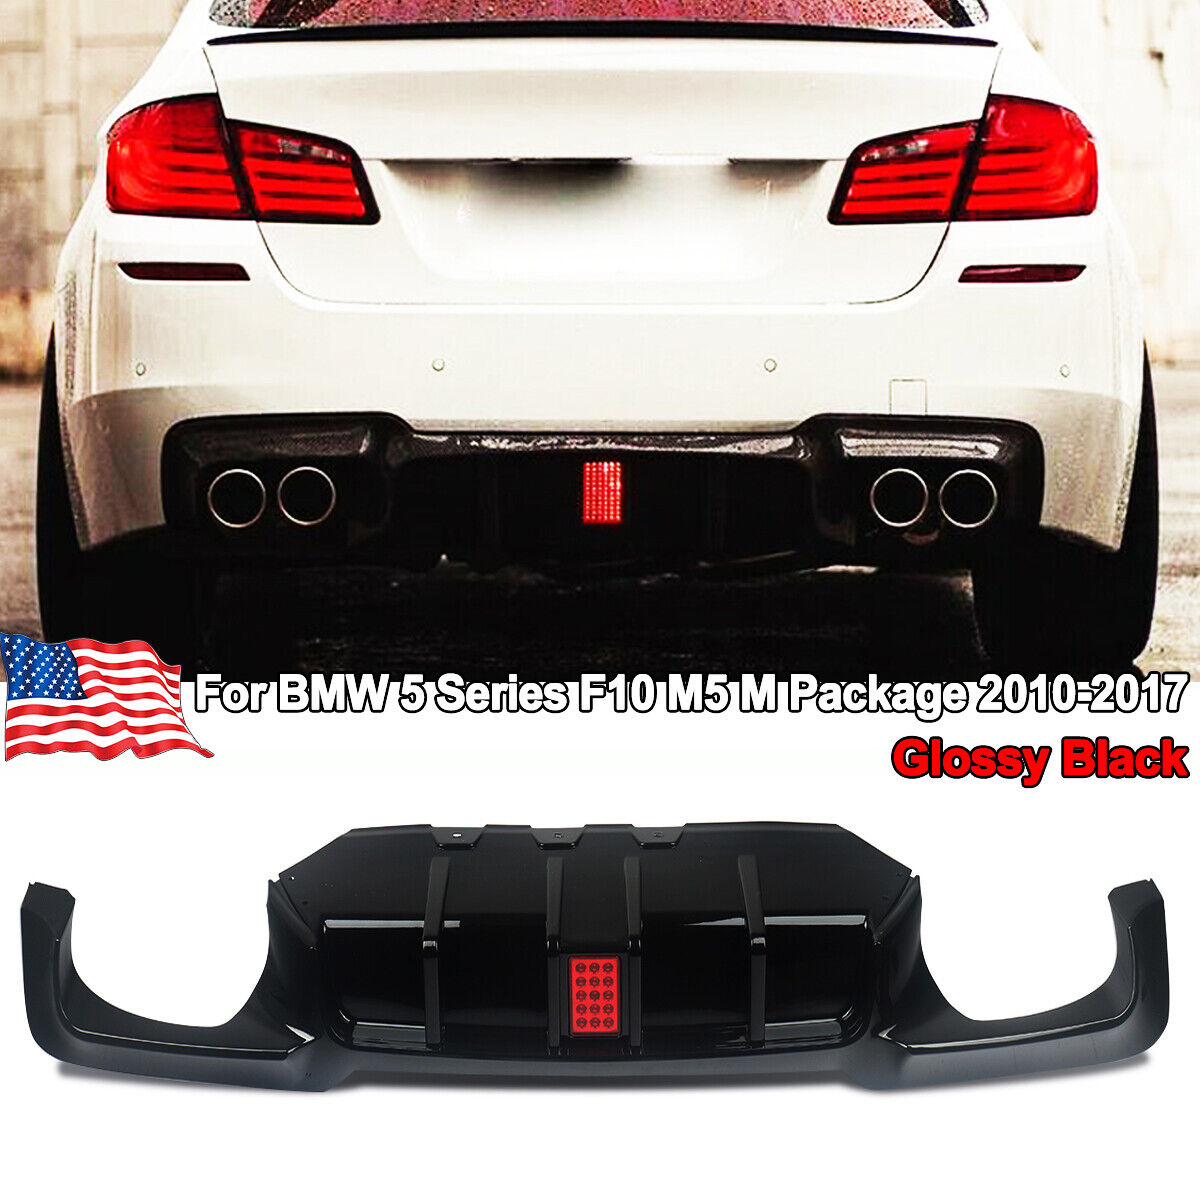 Glossy Black Rear Diffuser w/Red LED Light For BMW F10 540i M5 M Sport 2006-2017